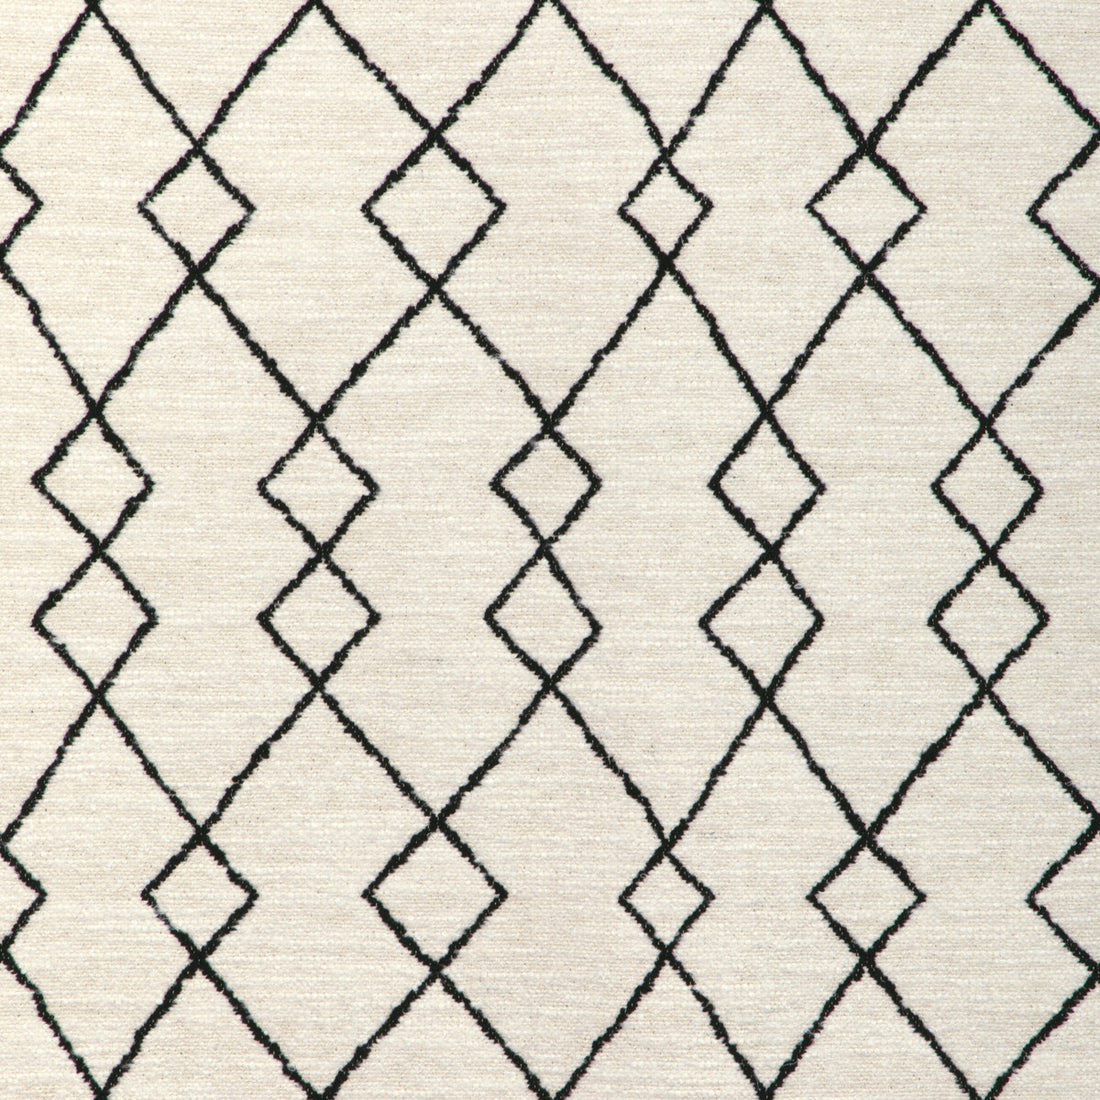 Geo Graphica fabric in onyx color - pattern 36904.81.0 - by Kravet Couture in the Atelier Weaves collection